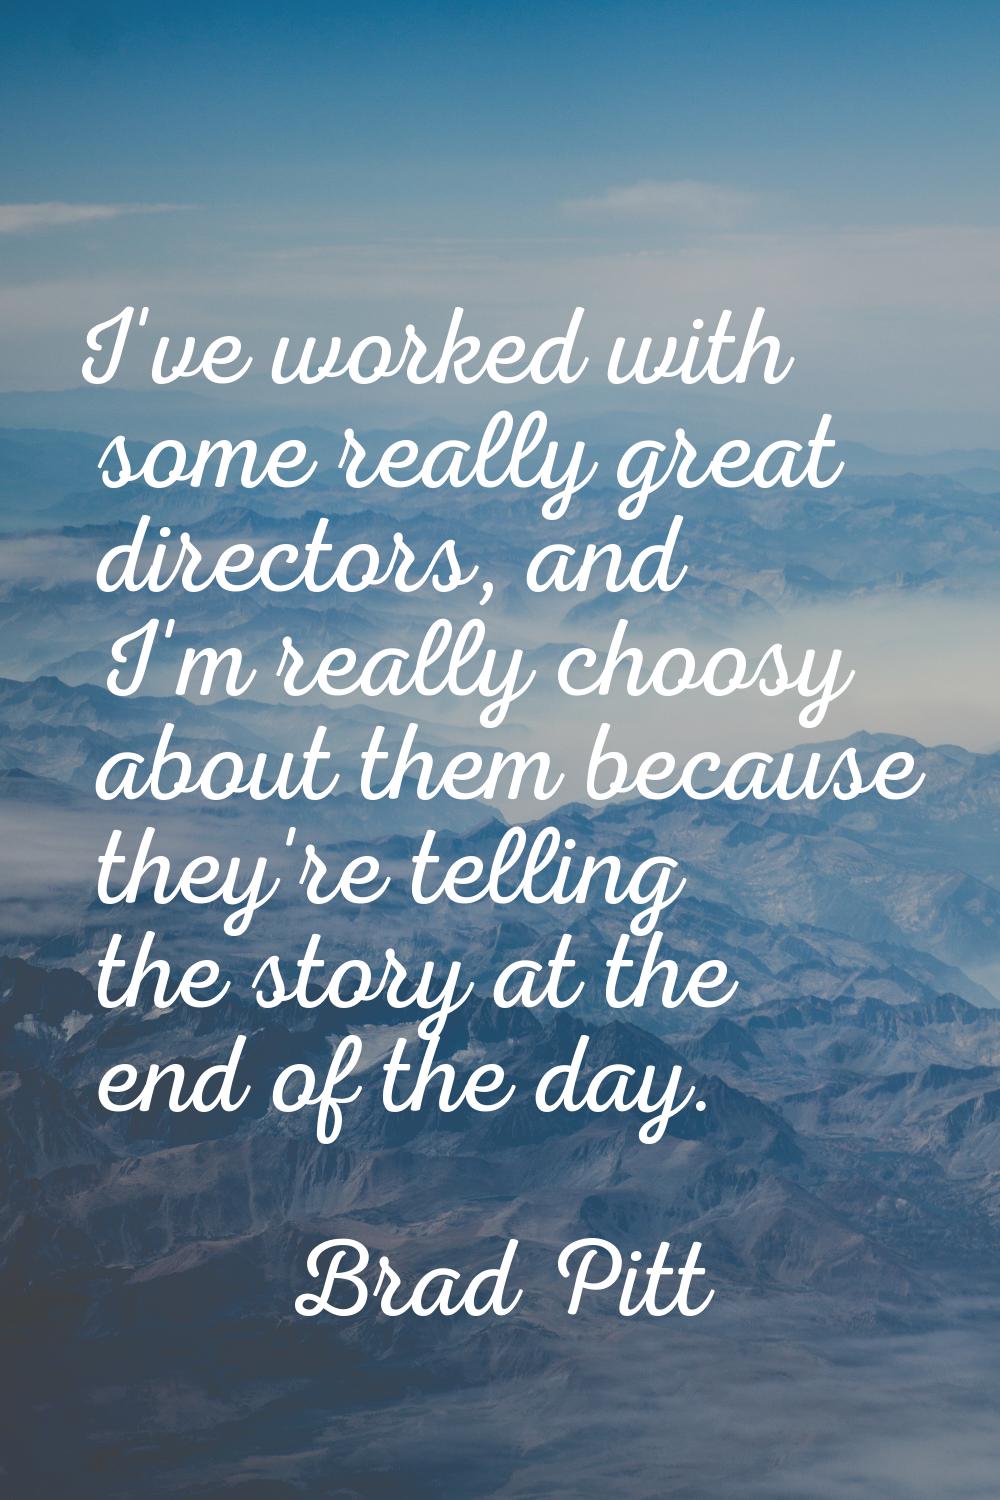 I've worked with some really great directors, and I'm really choosy about them because they're tell